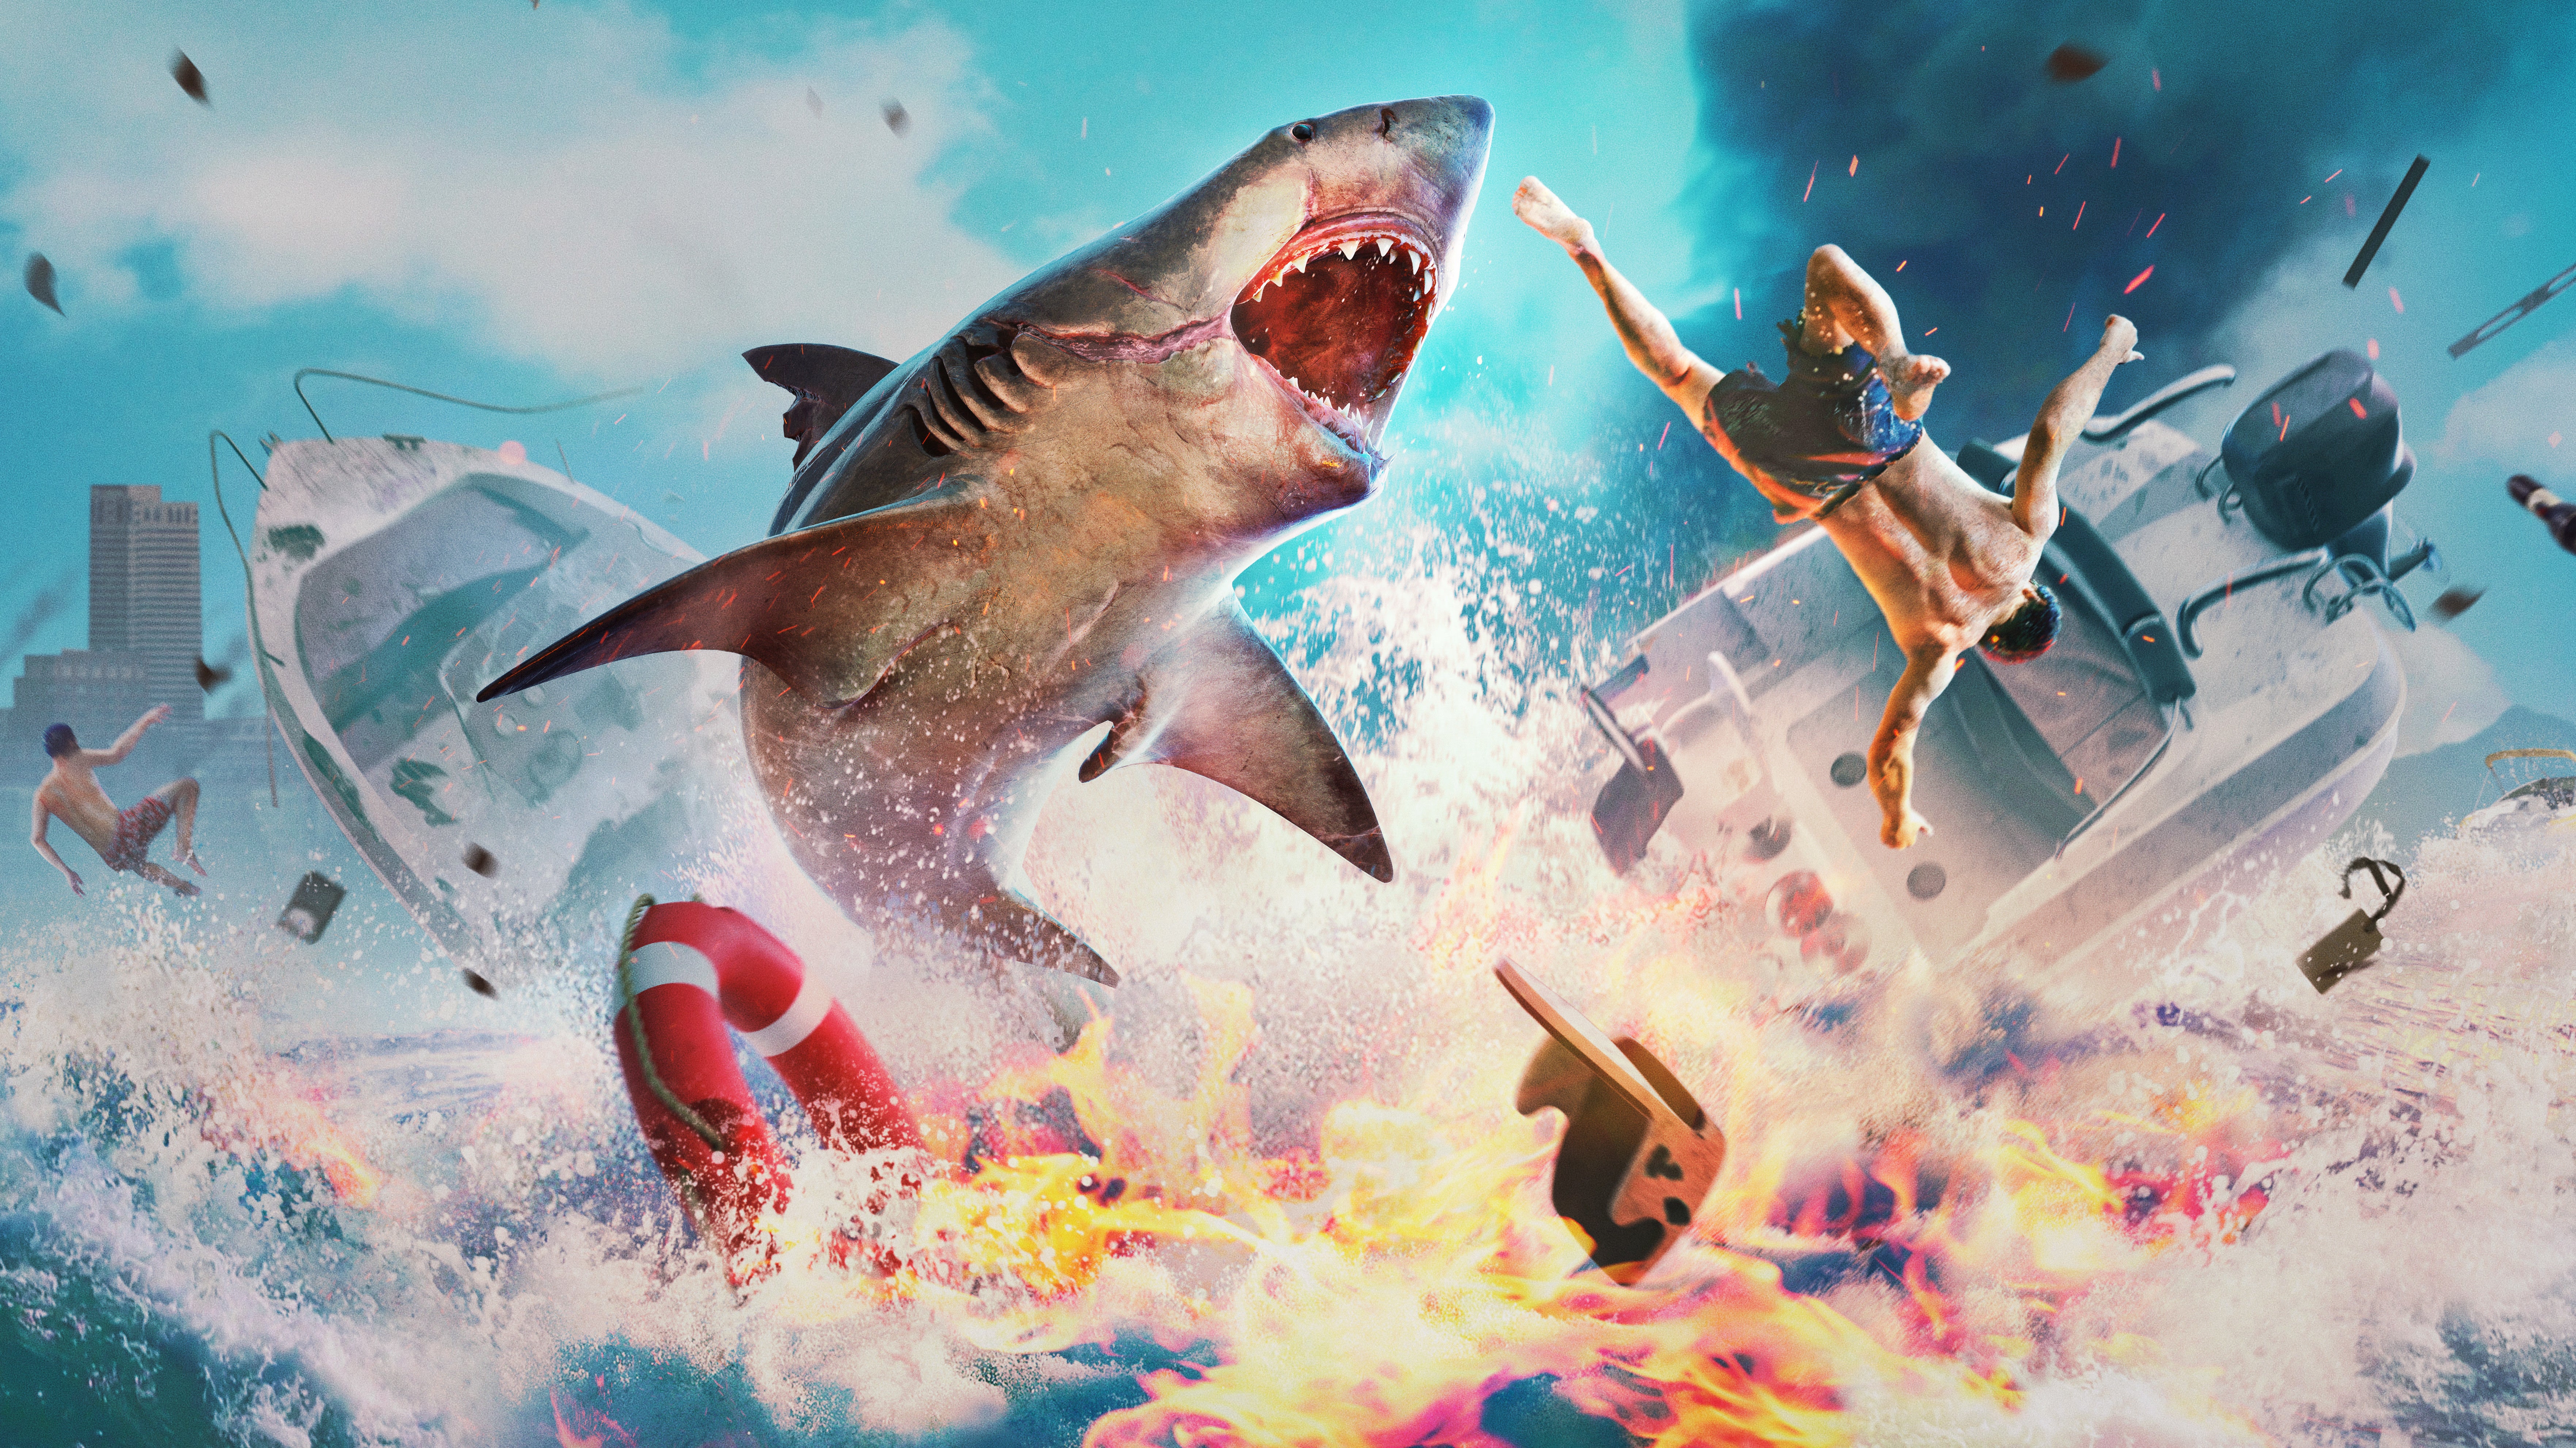 Shark Role-Playing Game Maneater Is Like Grand Theft Auto, Of All Things